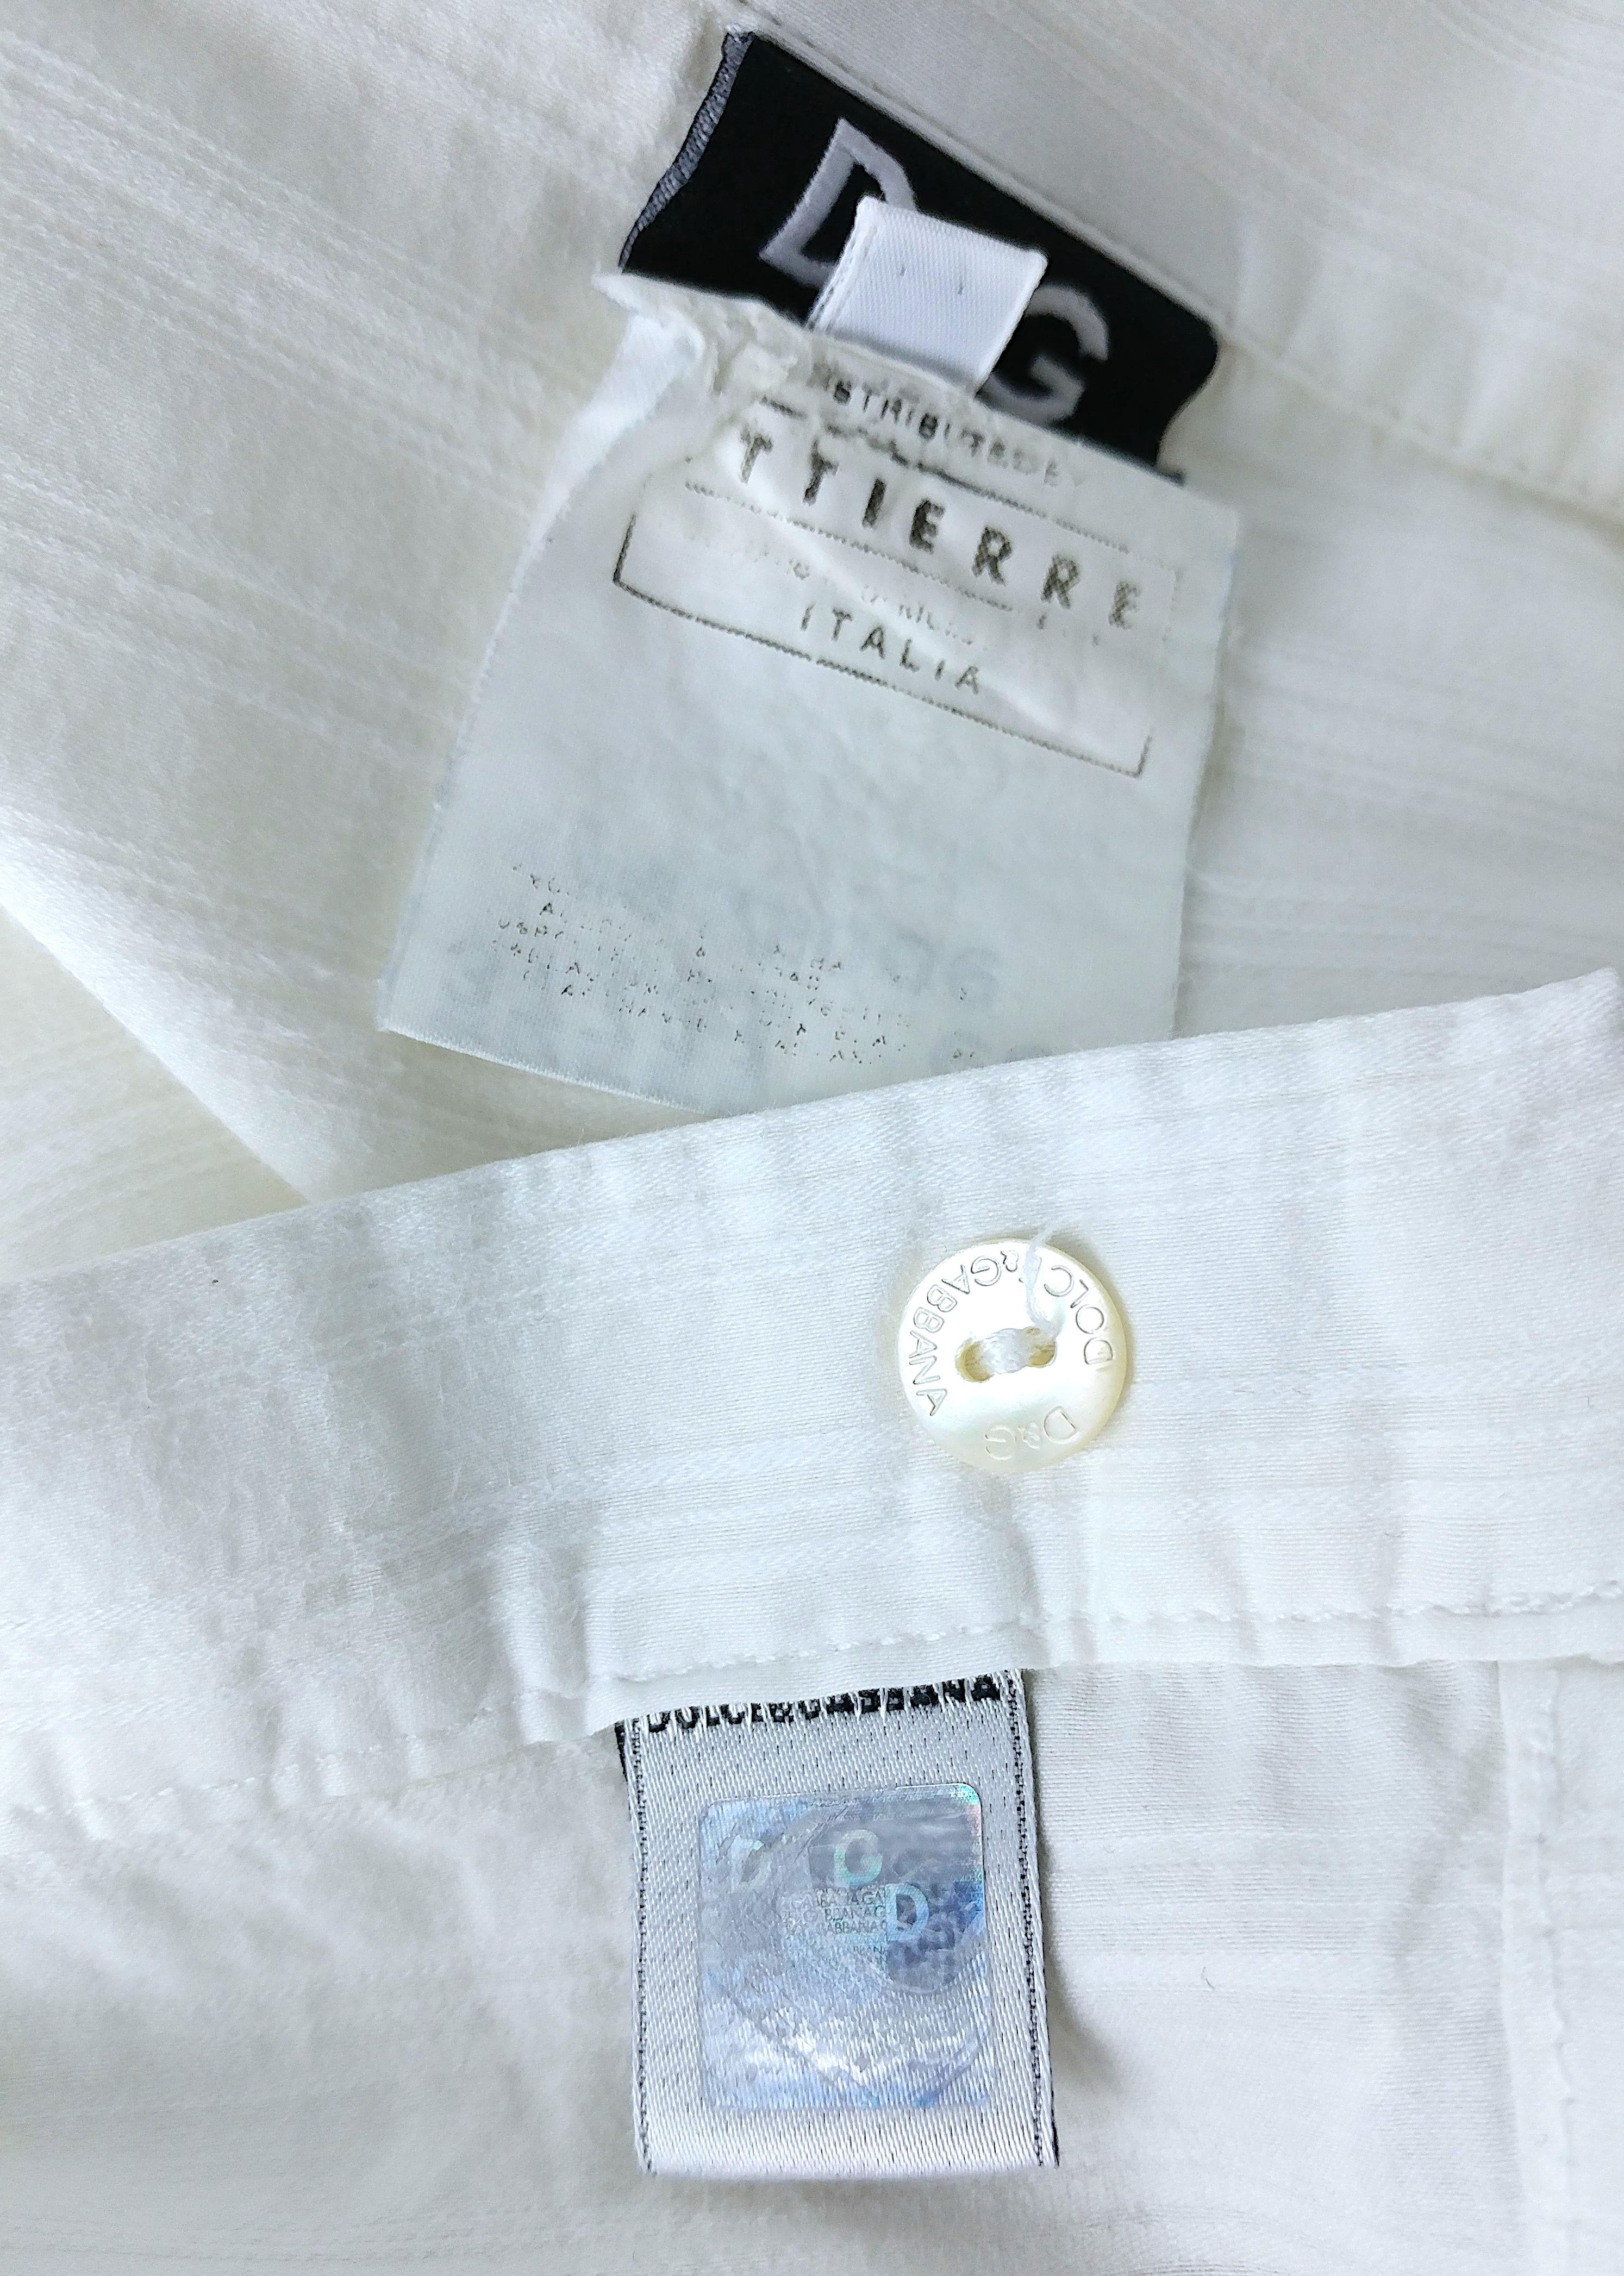 DOLCE & GABBANA – White Shirt with Long Sleeves from the SS 2006 Collection 4